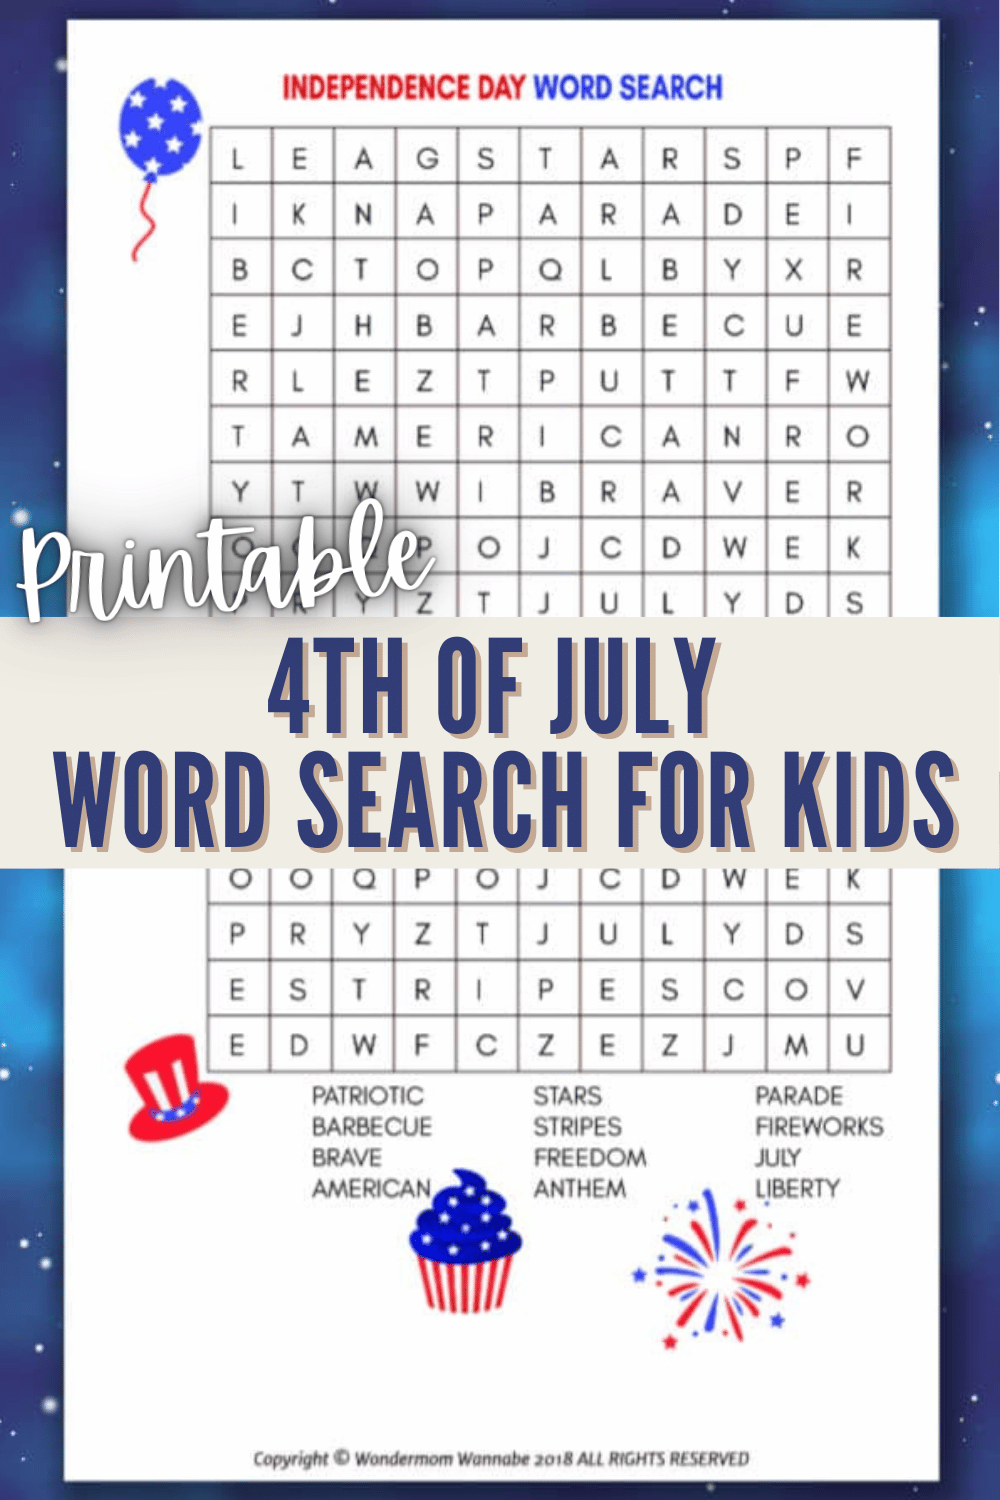 This free printable 4th of July word search for kids is a wonderful patriotic activity to help kids learn vocabulary words associated with Independence Day. #4thofJuly #wordsearch #printables via @wondermomwannab